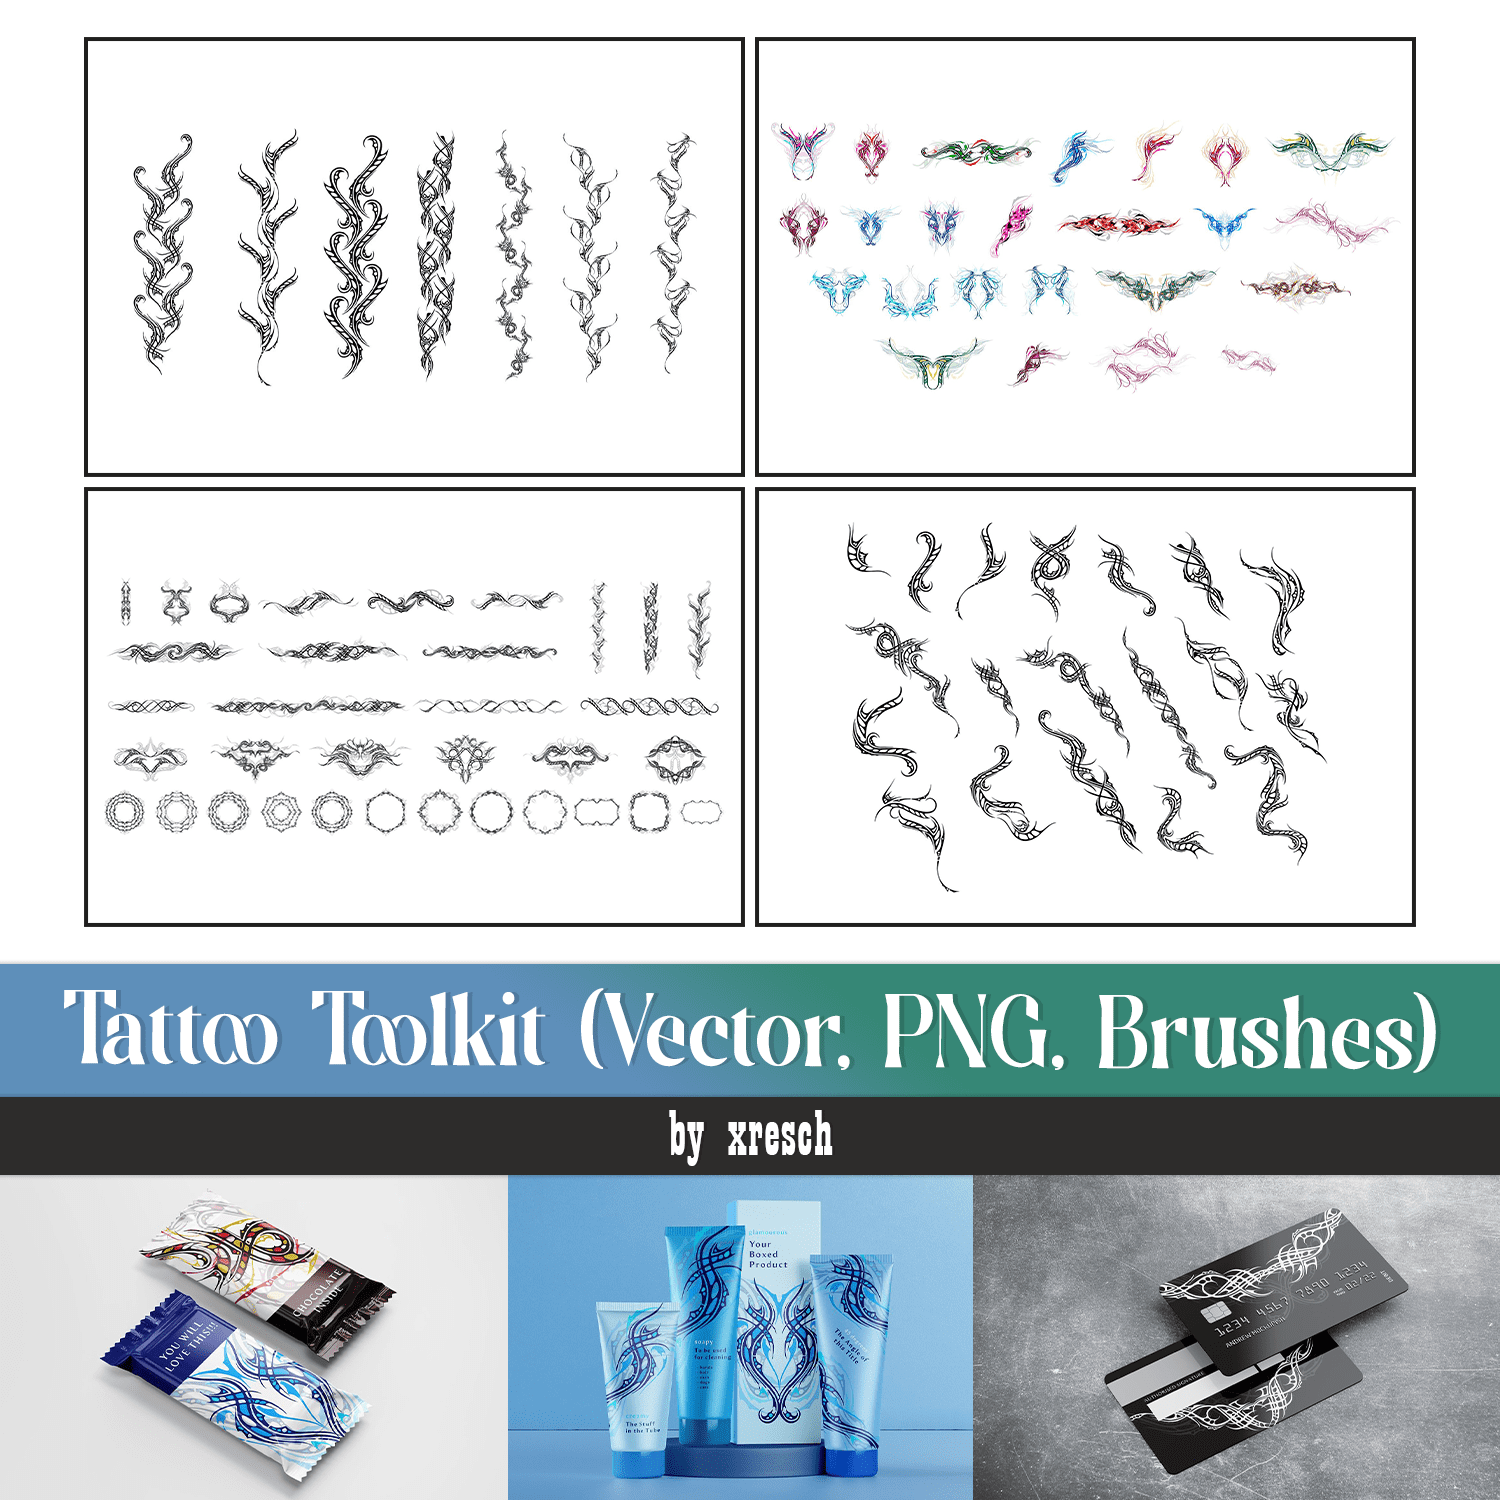 Tattoo Toolkit(Vector, PNG, Brushes) - Facebook.